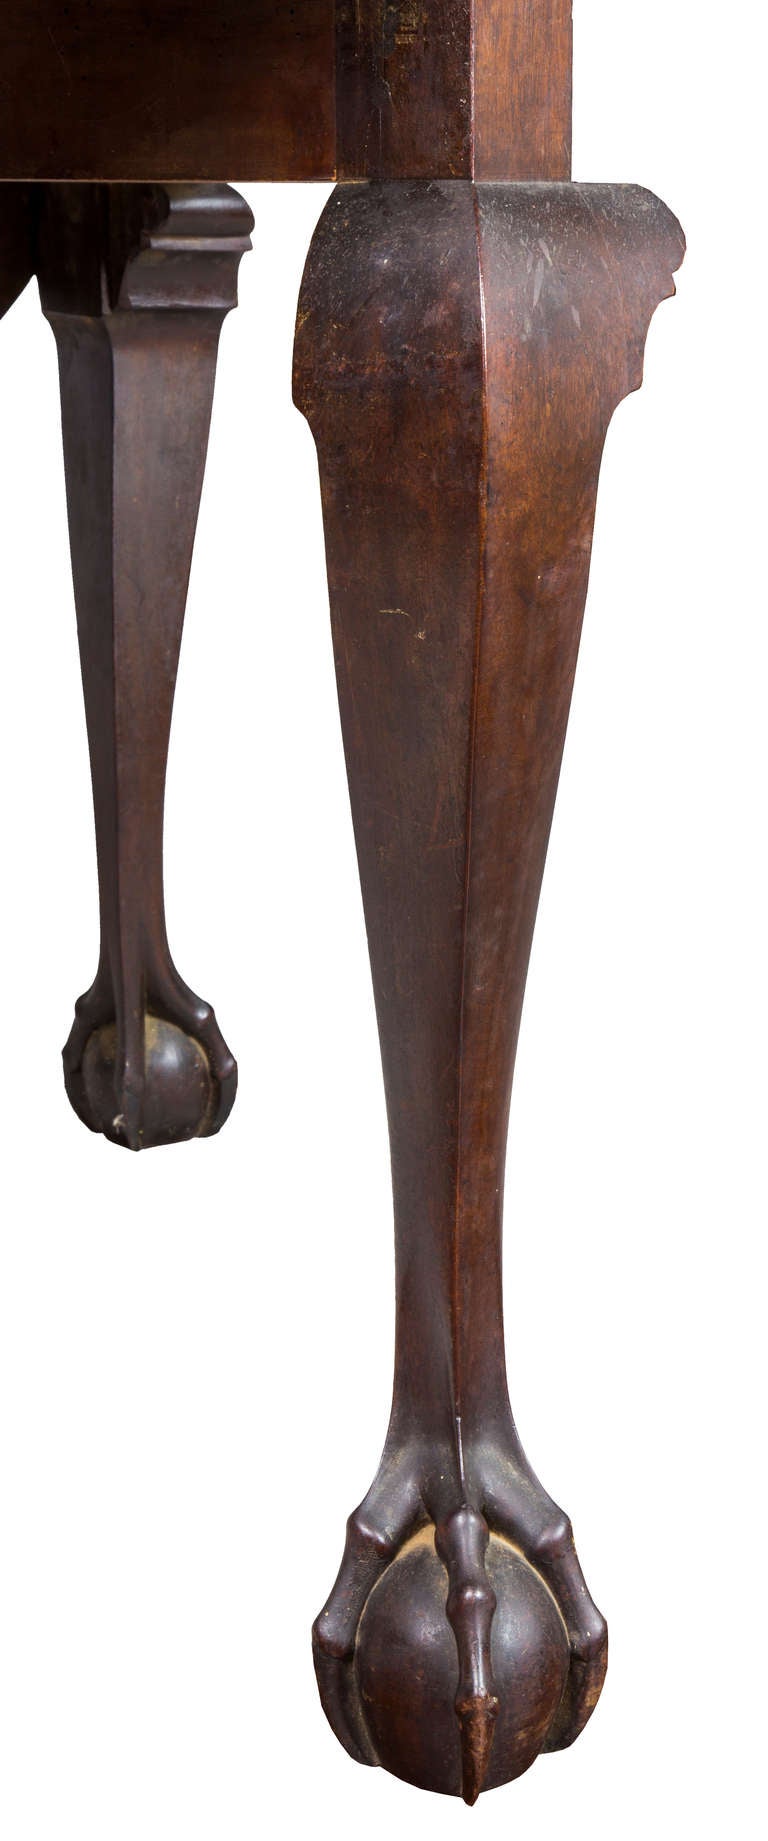 This table has a reshaped top. It probably had long, square leaves. Like the Venus de Milo, we can’t see throwing it in the wood pile because what is there is the best part of an altered masterpiece, its carved legs with claw and ball feet which is